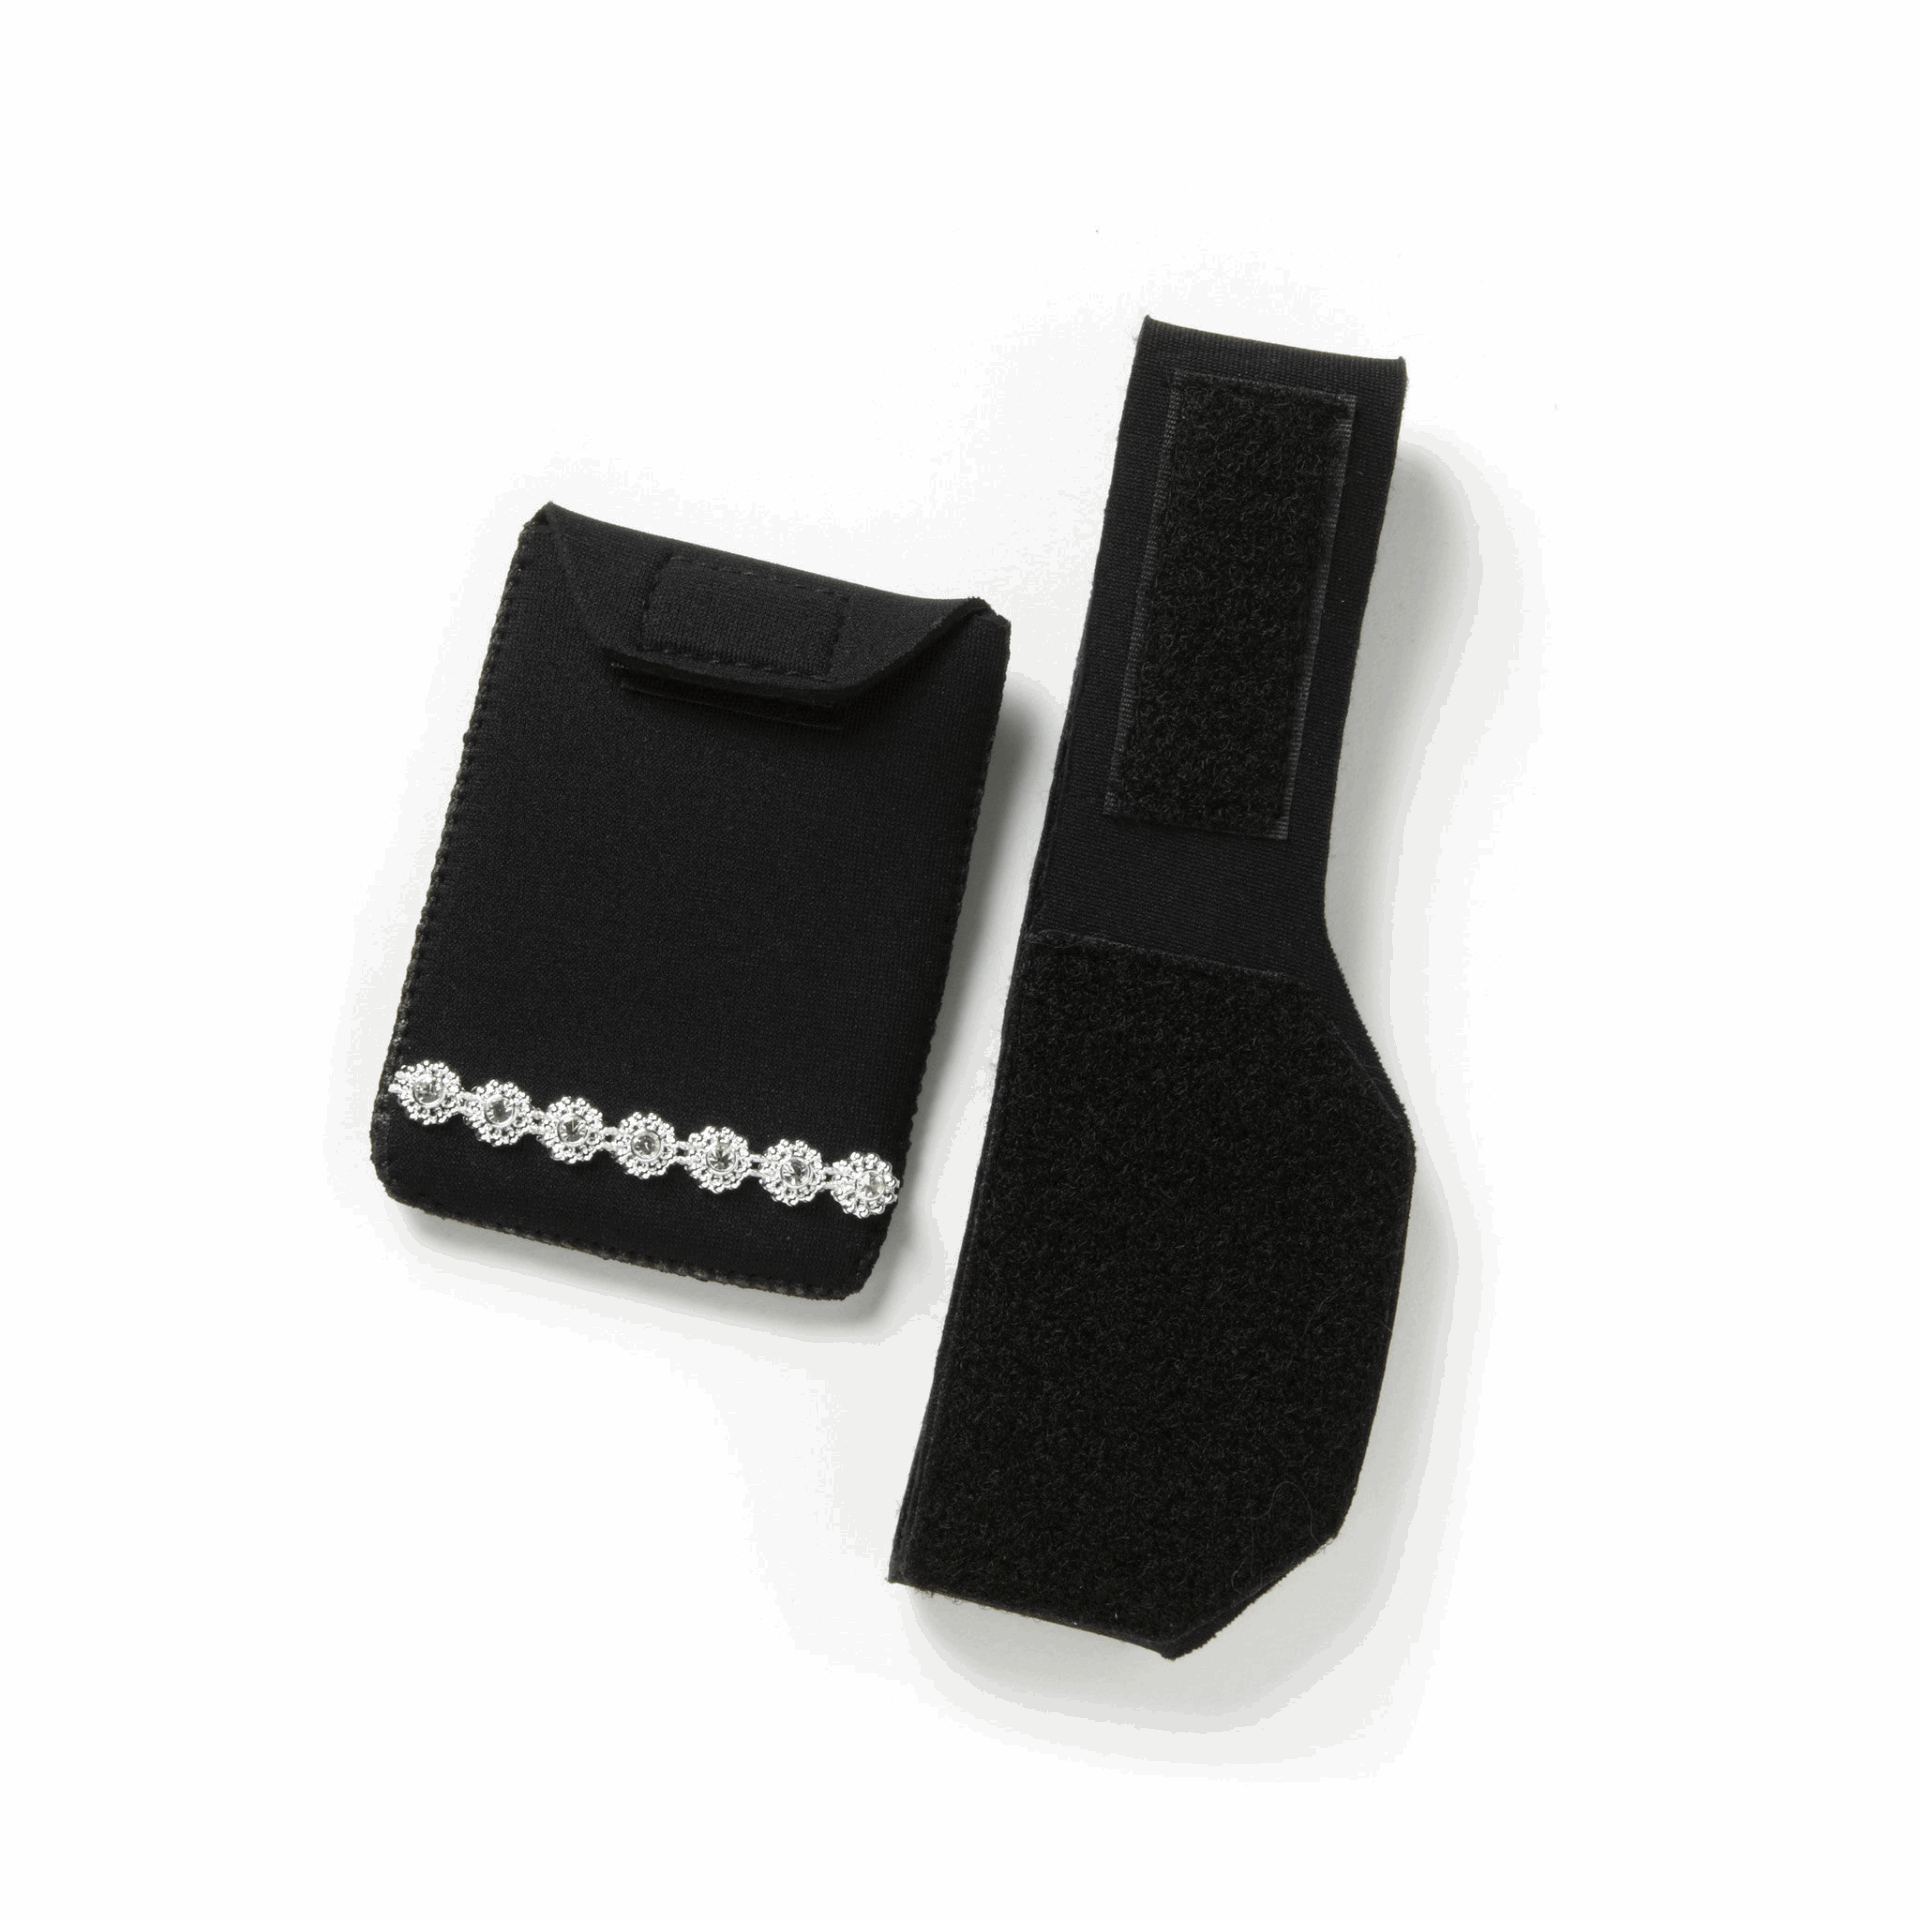 *bling!* Essentials (small) ~ Undercover Leg Stash for IDs & Credit Cards